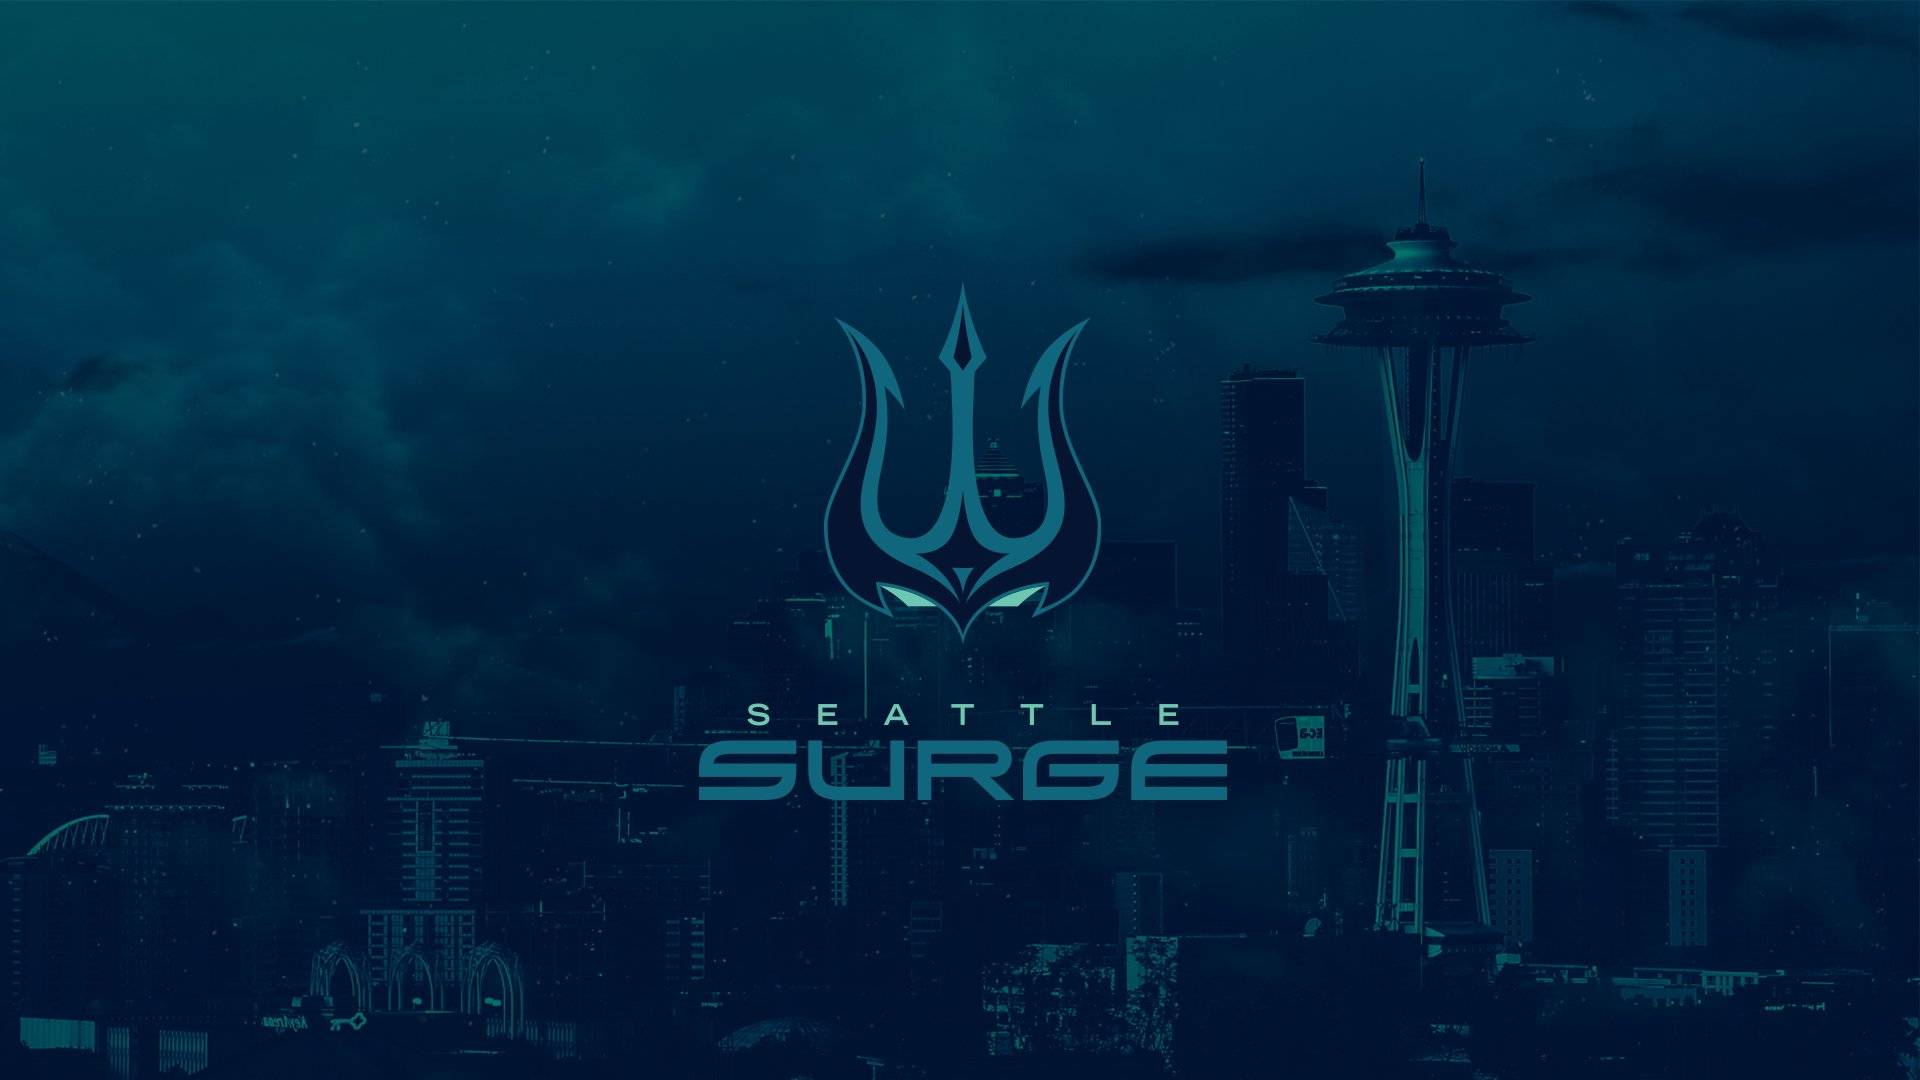 Seattle Surge reviving their roster to make the run in next CoD League season